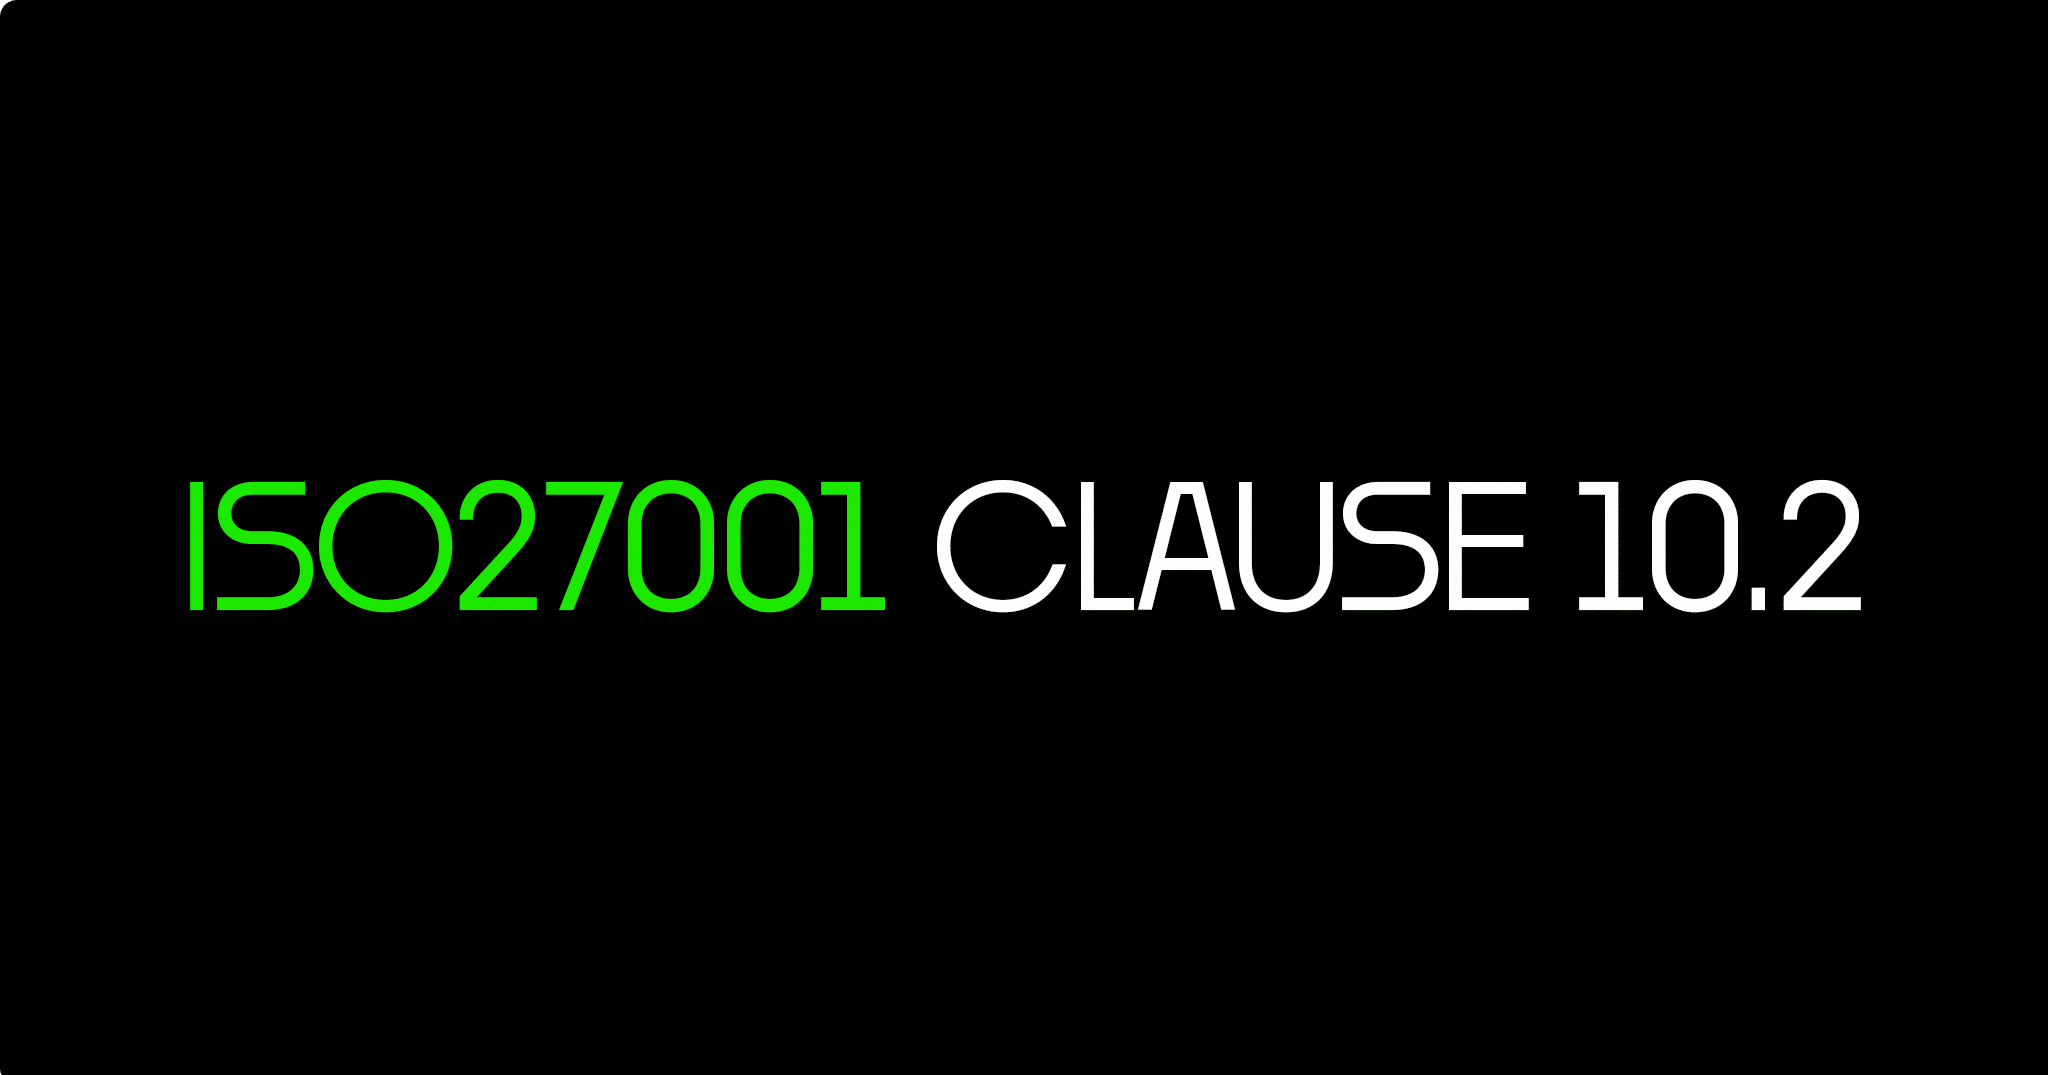 ISO 27001 Clause 10.2 Nonconformity and Corrective Action – Ultimate Certification Guide